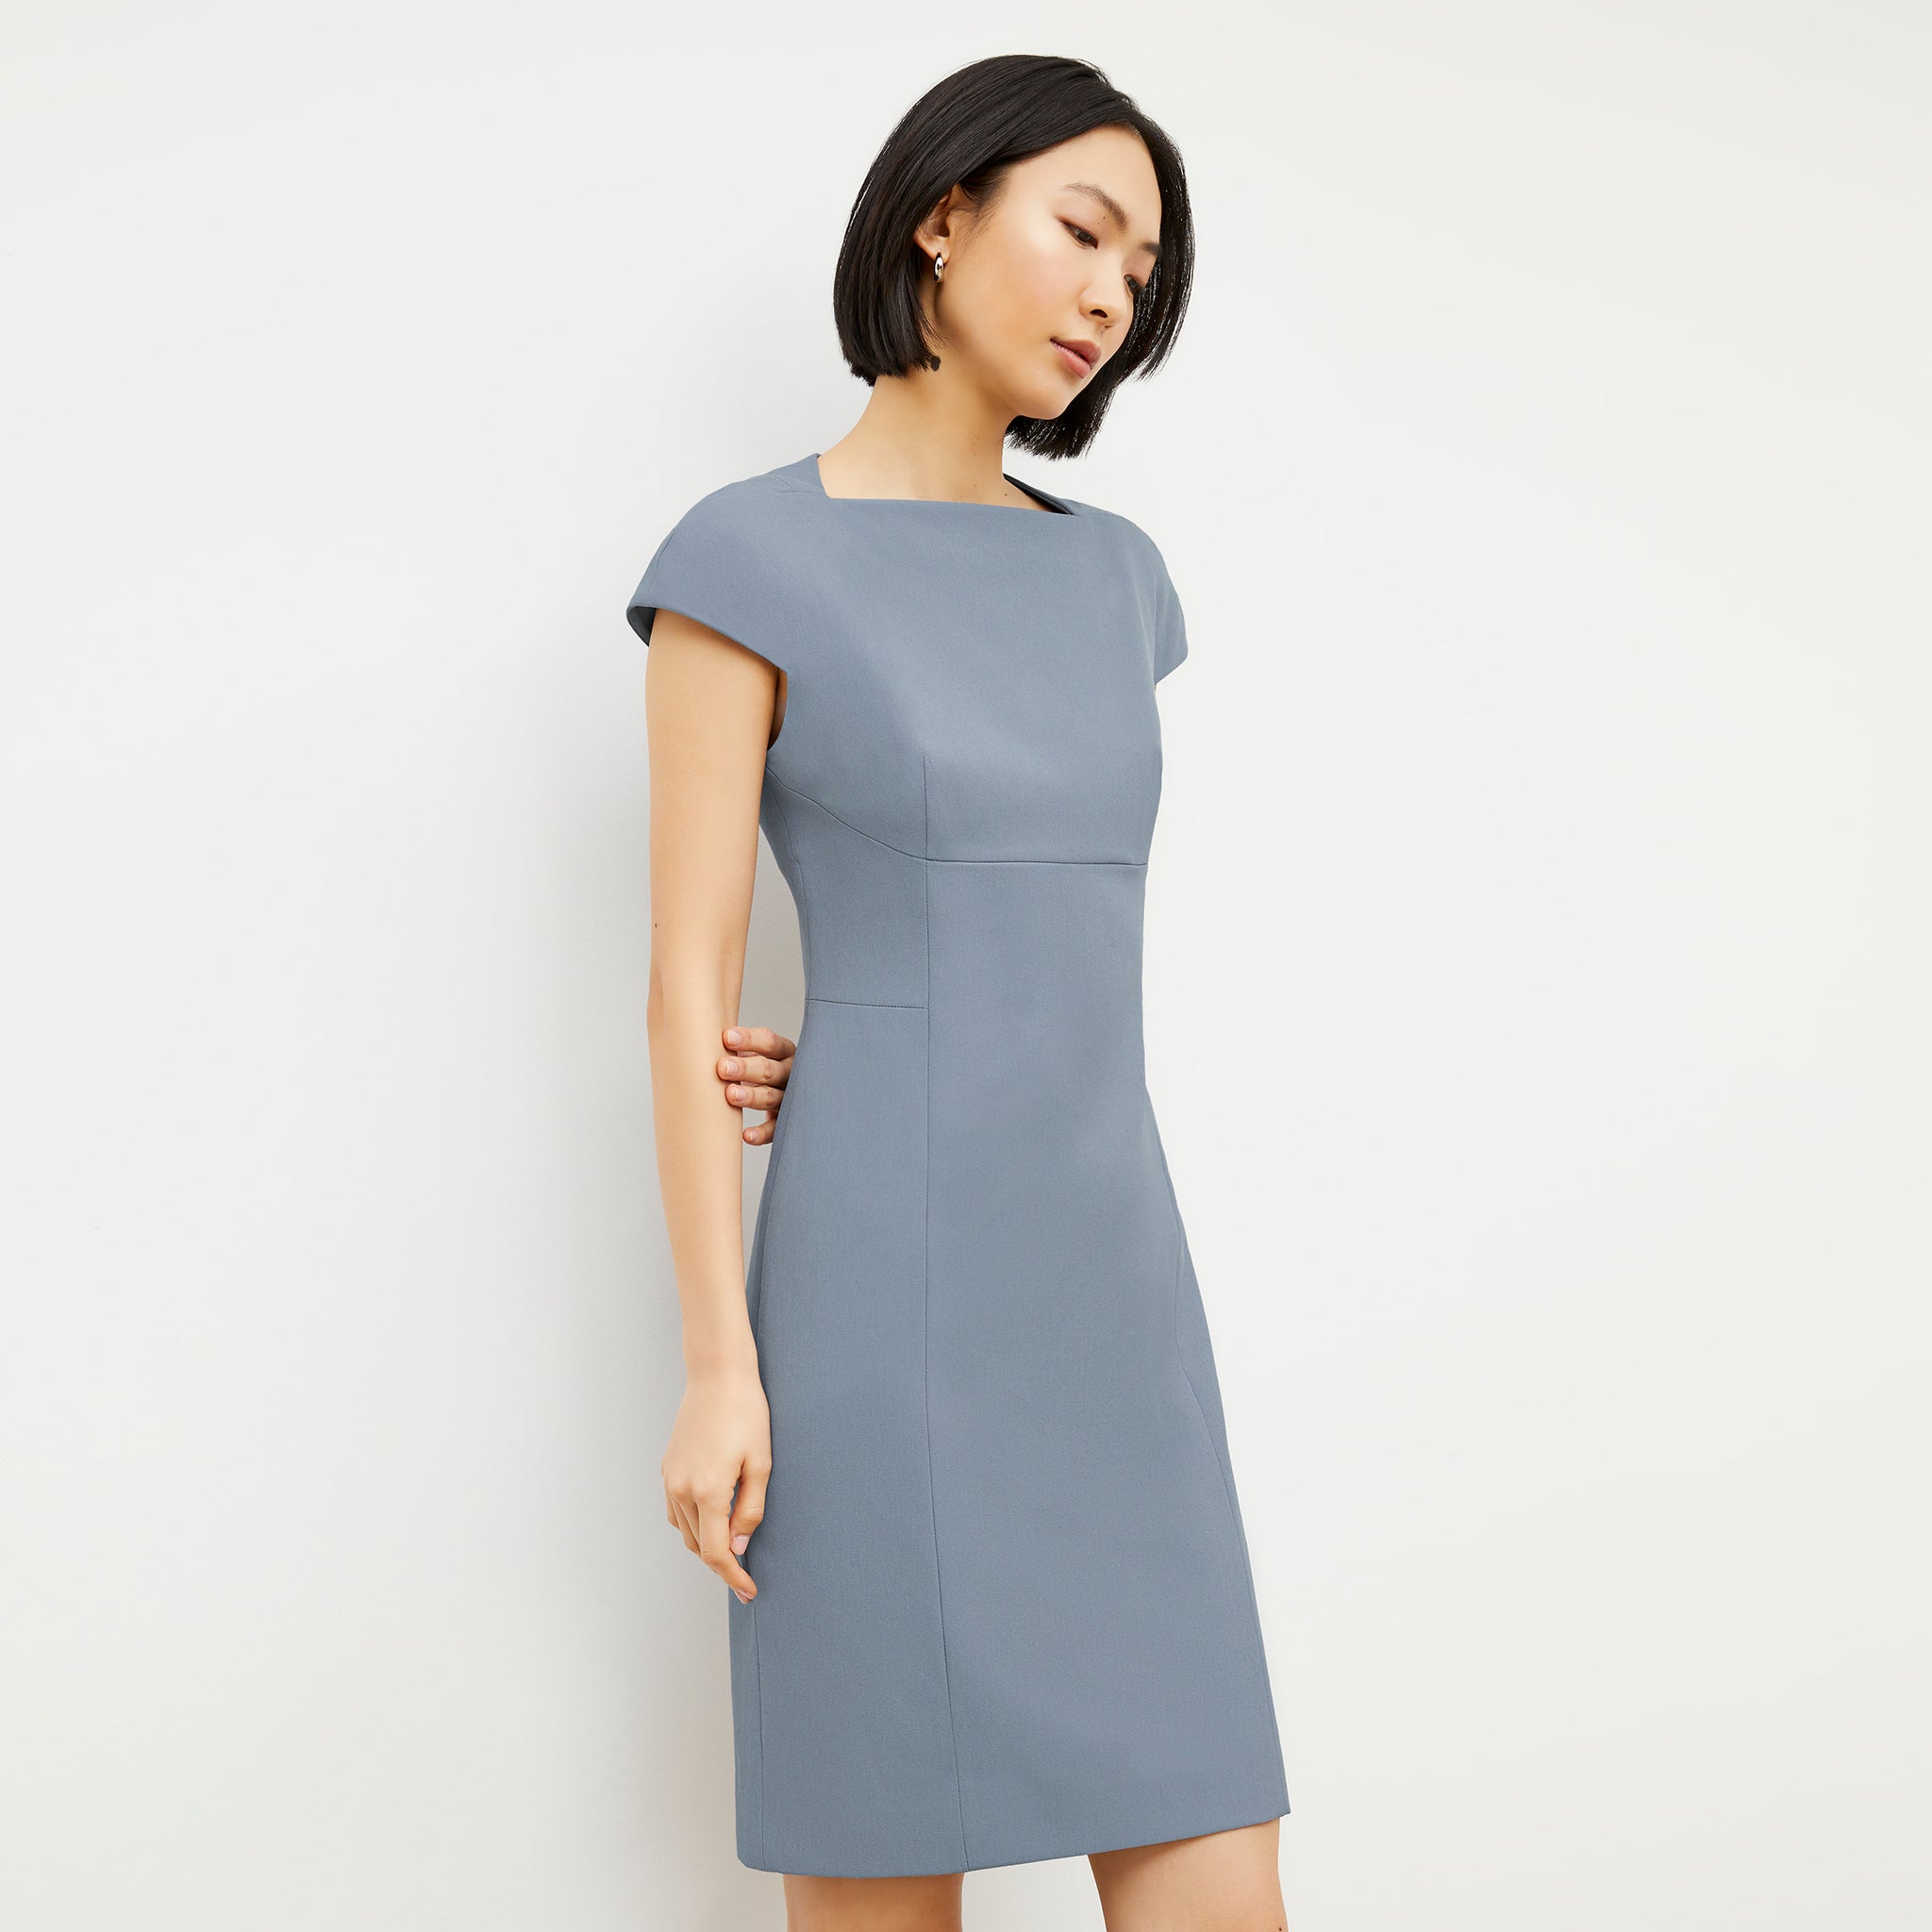 Side image of a woman wearing the Ashley Dress - Recycled Wondertex in Steel Blue